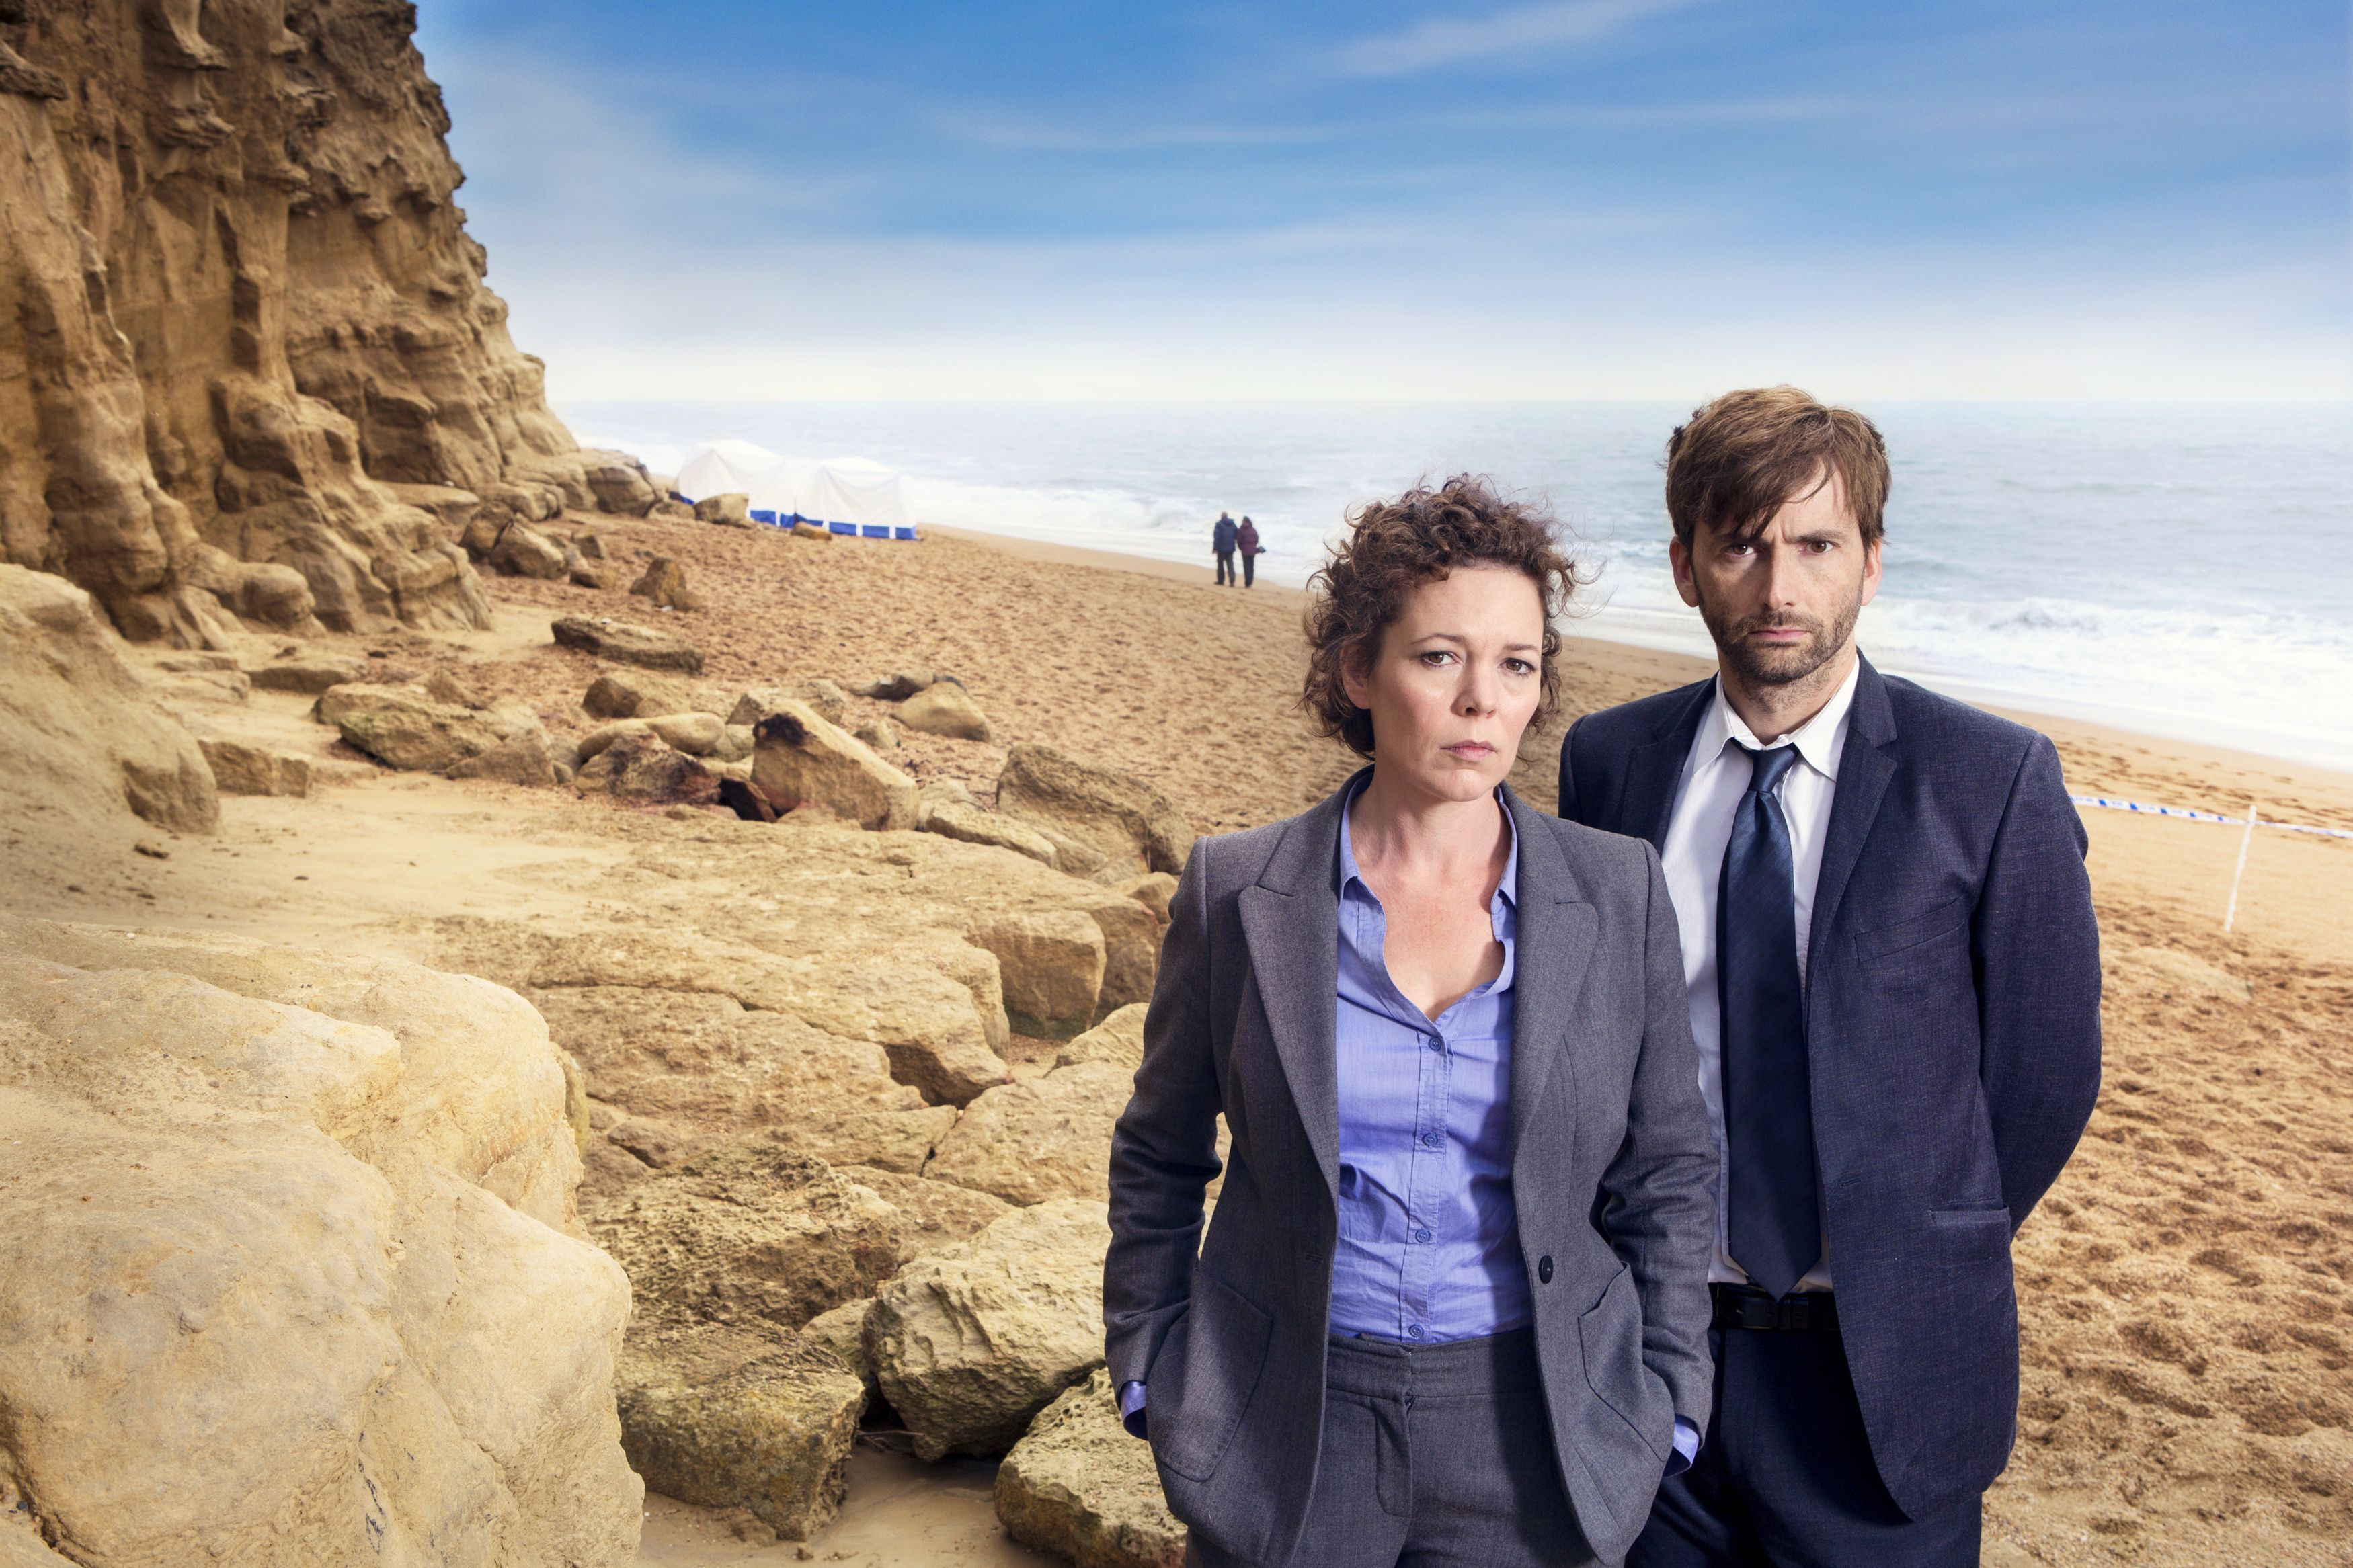 David Tennant and Olivia Colman in their roles as Detective Inspector Alec Hardy and Detective Sergeant Ellie Miller in Broadchurch